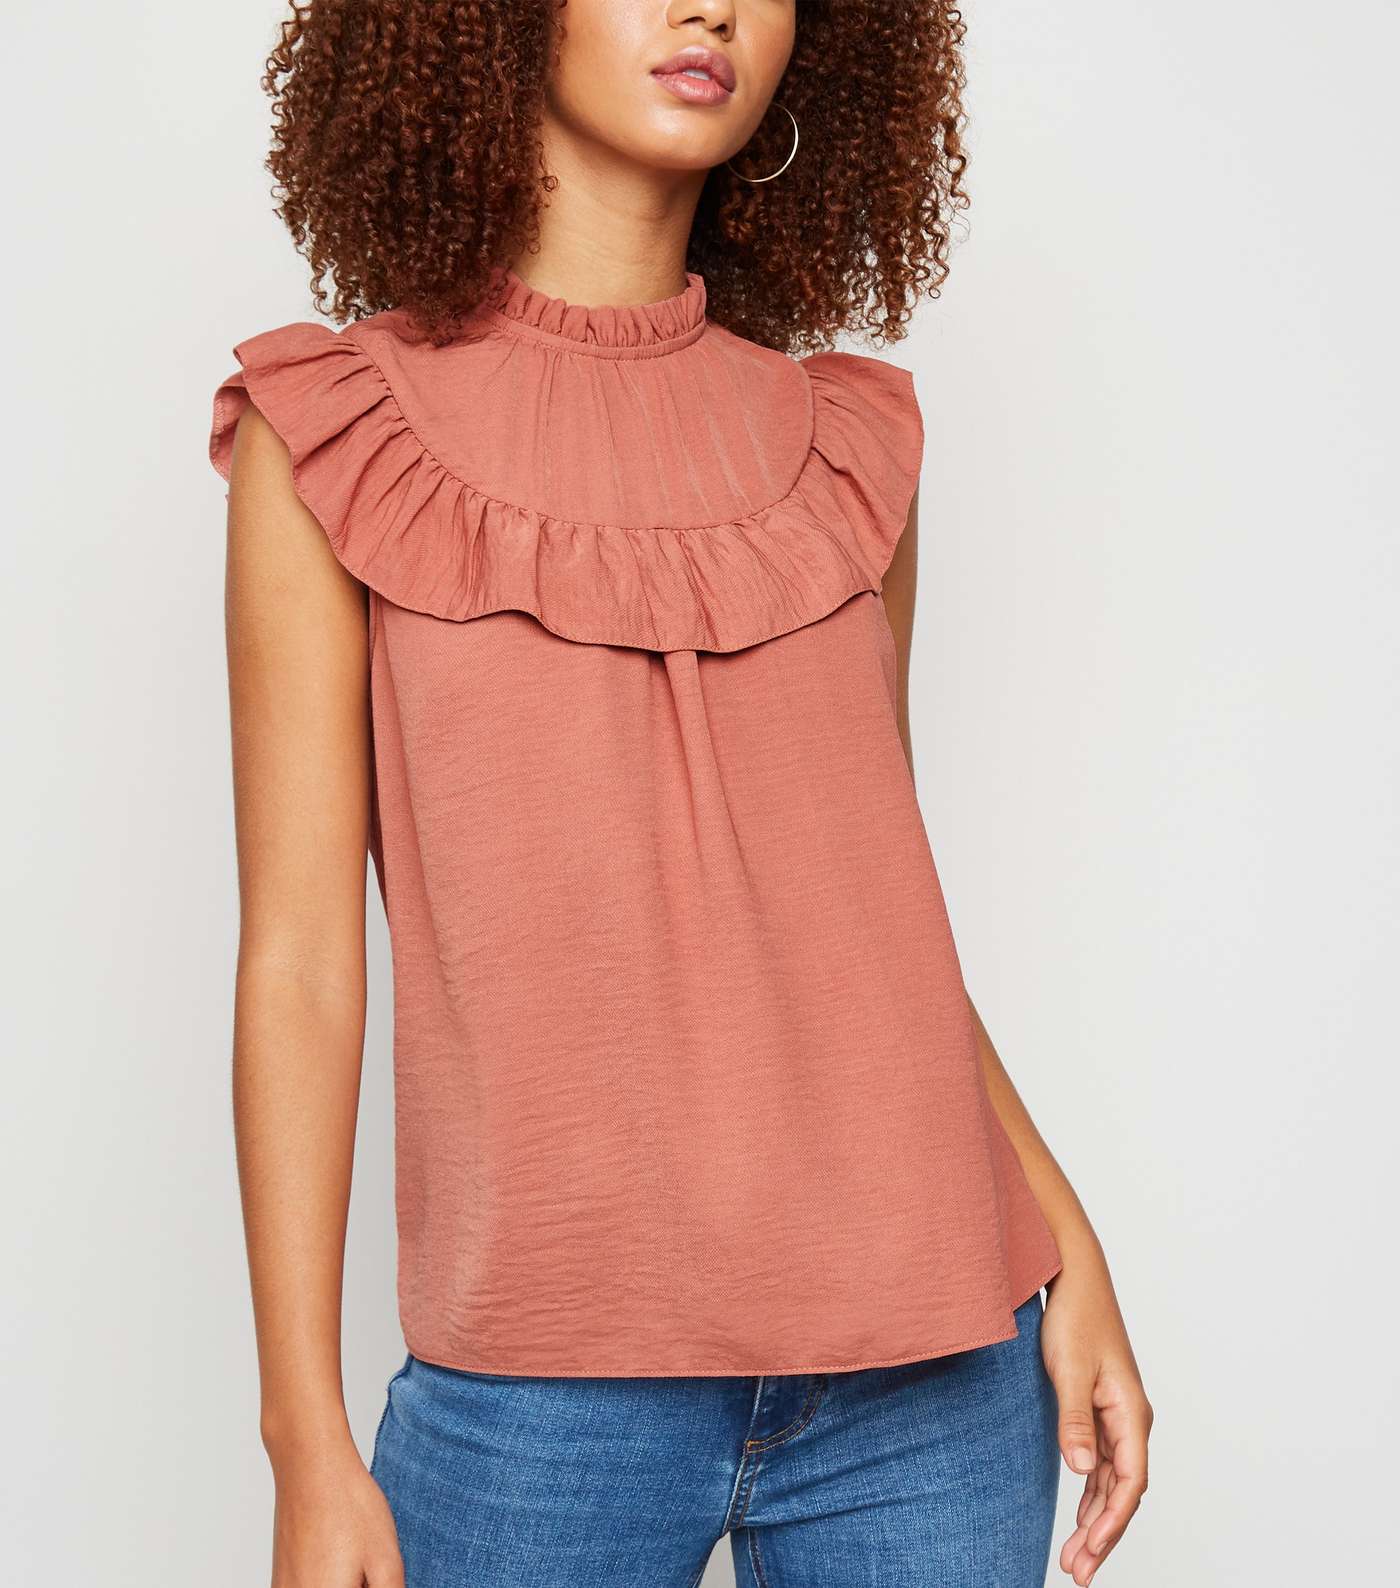 Mid Pink Frill High Neck Blouse